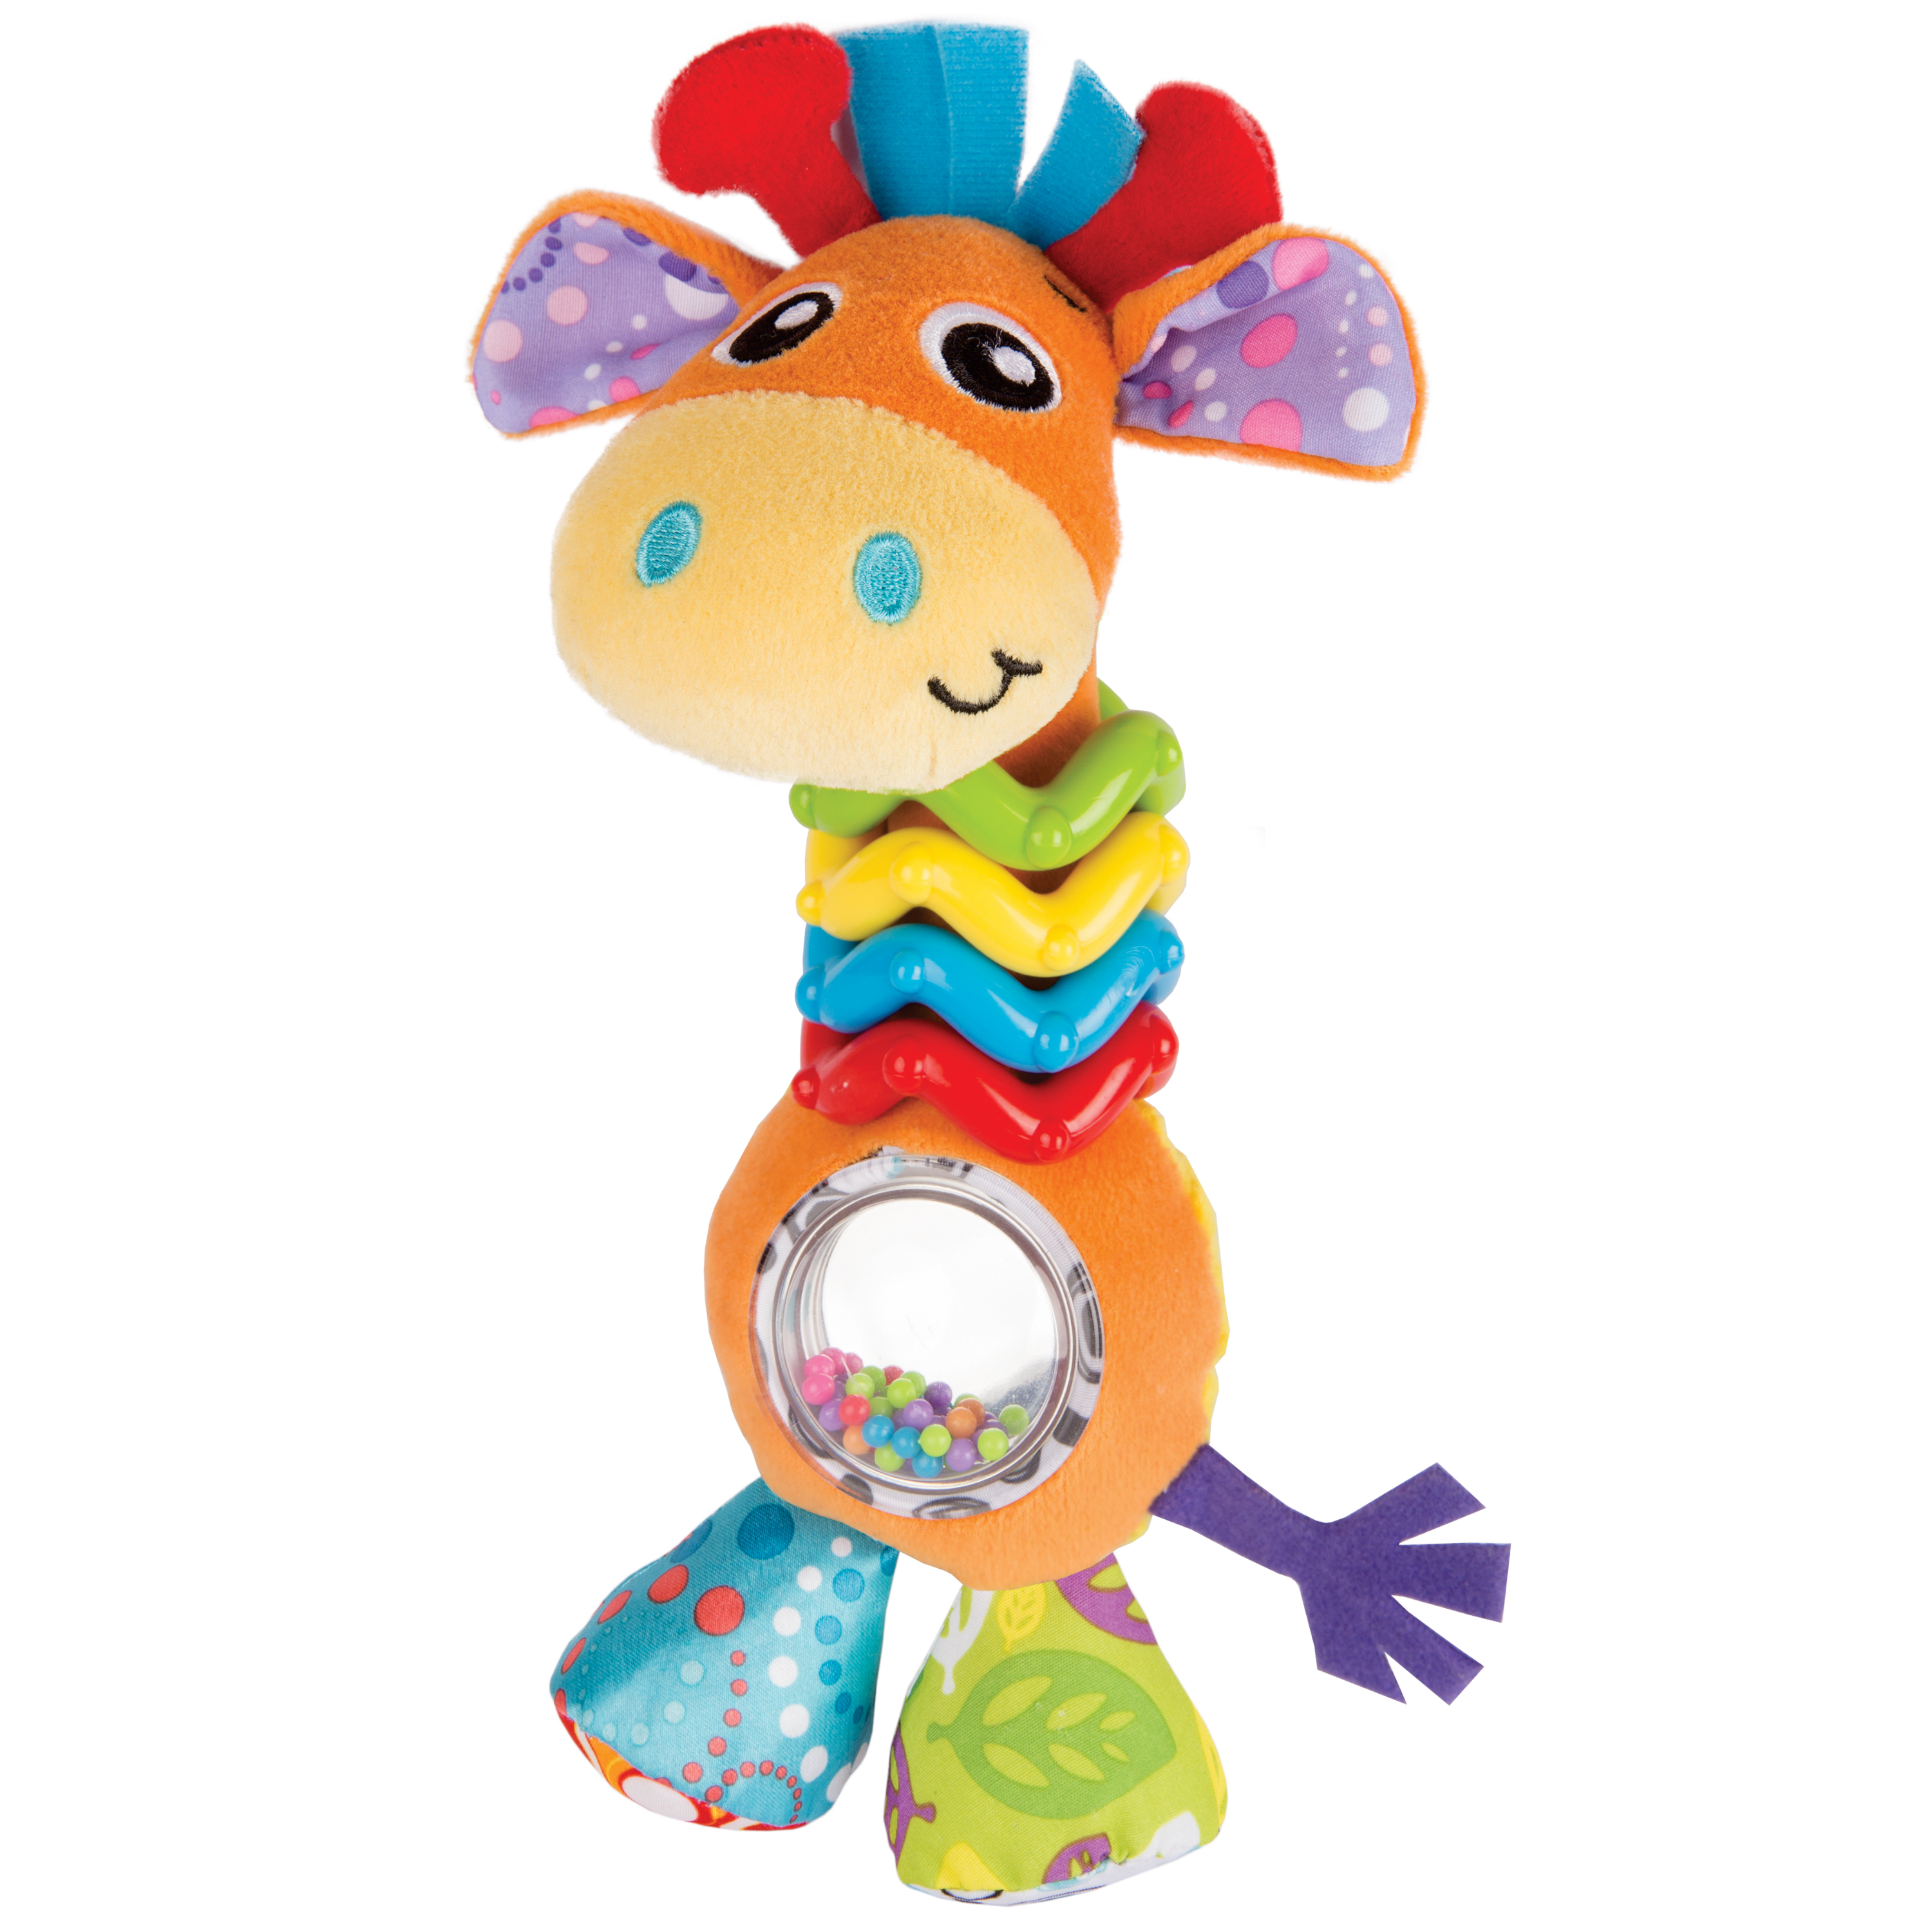 Playgro's Best Gift Set, 2-in-1 Baby Toy Bundle with My Bead Buddy Giraffe and Discovery Ball - image 2 of 12